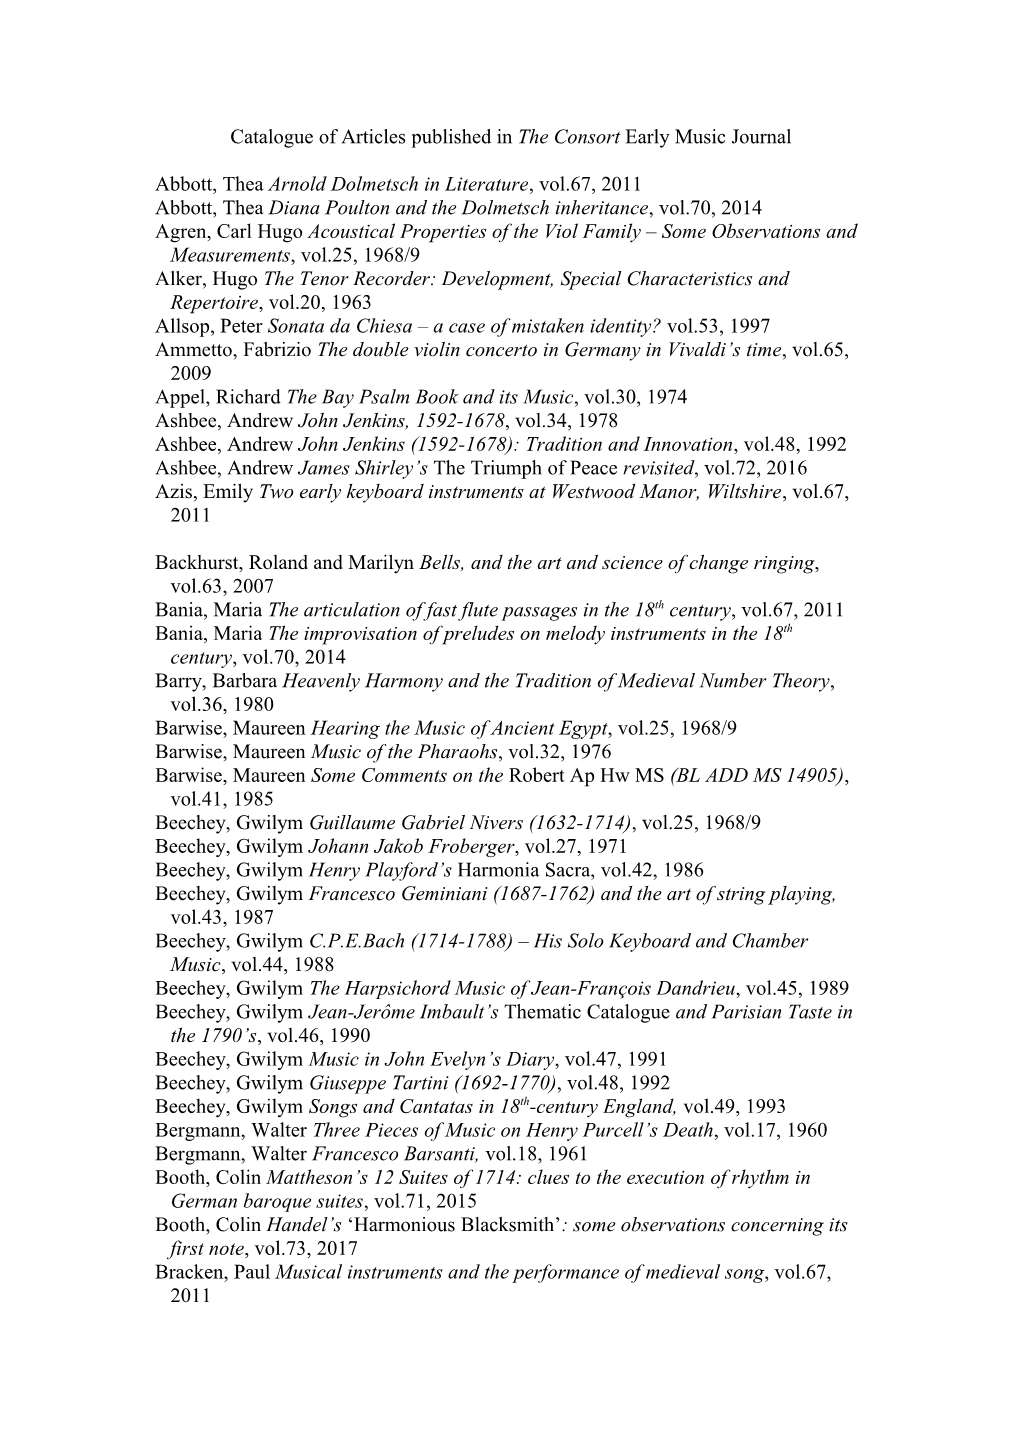 Catalogue of Articles Published in the Consort